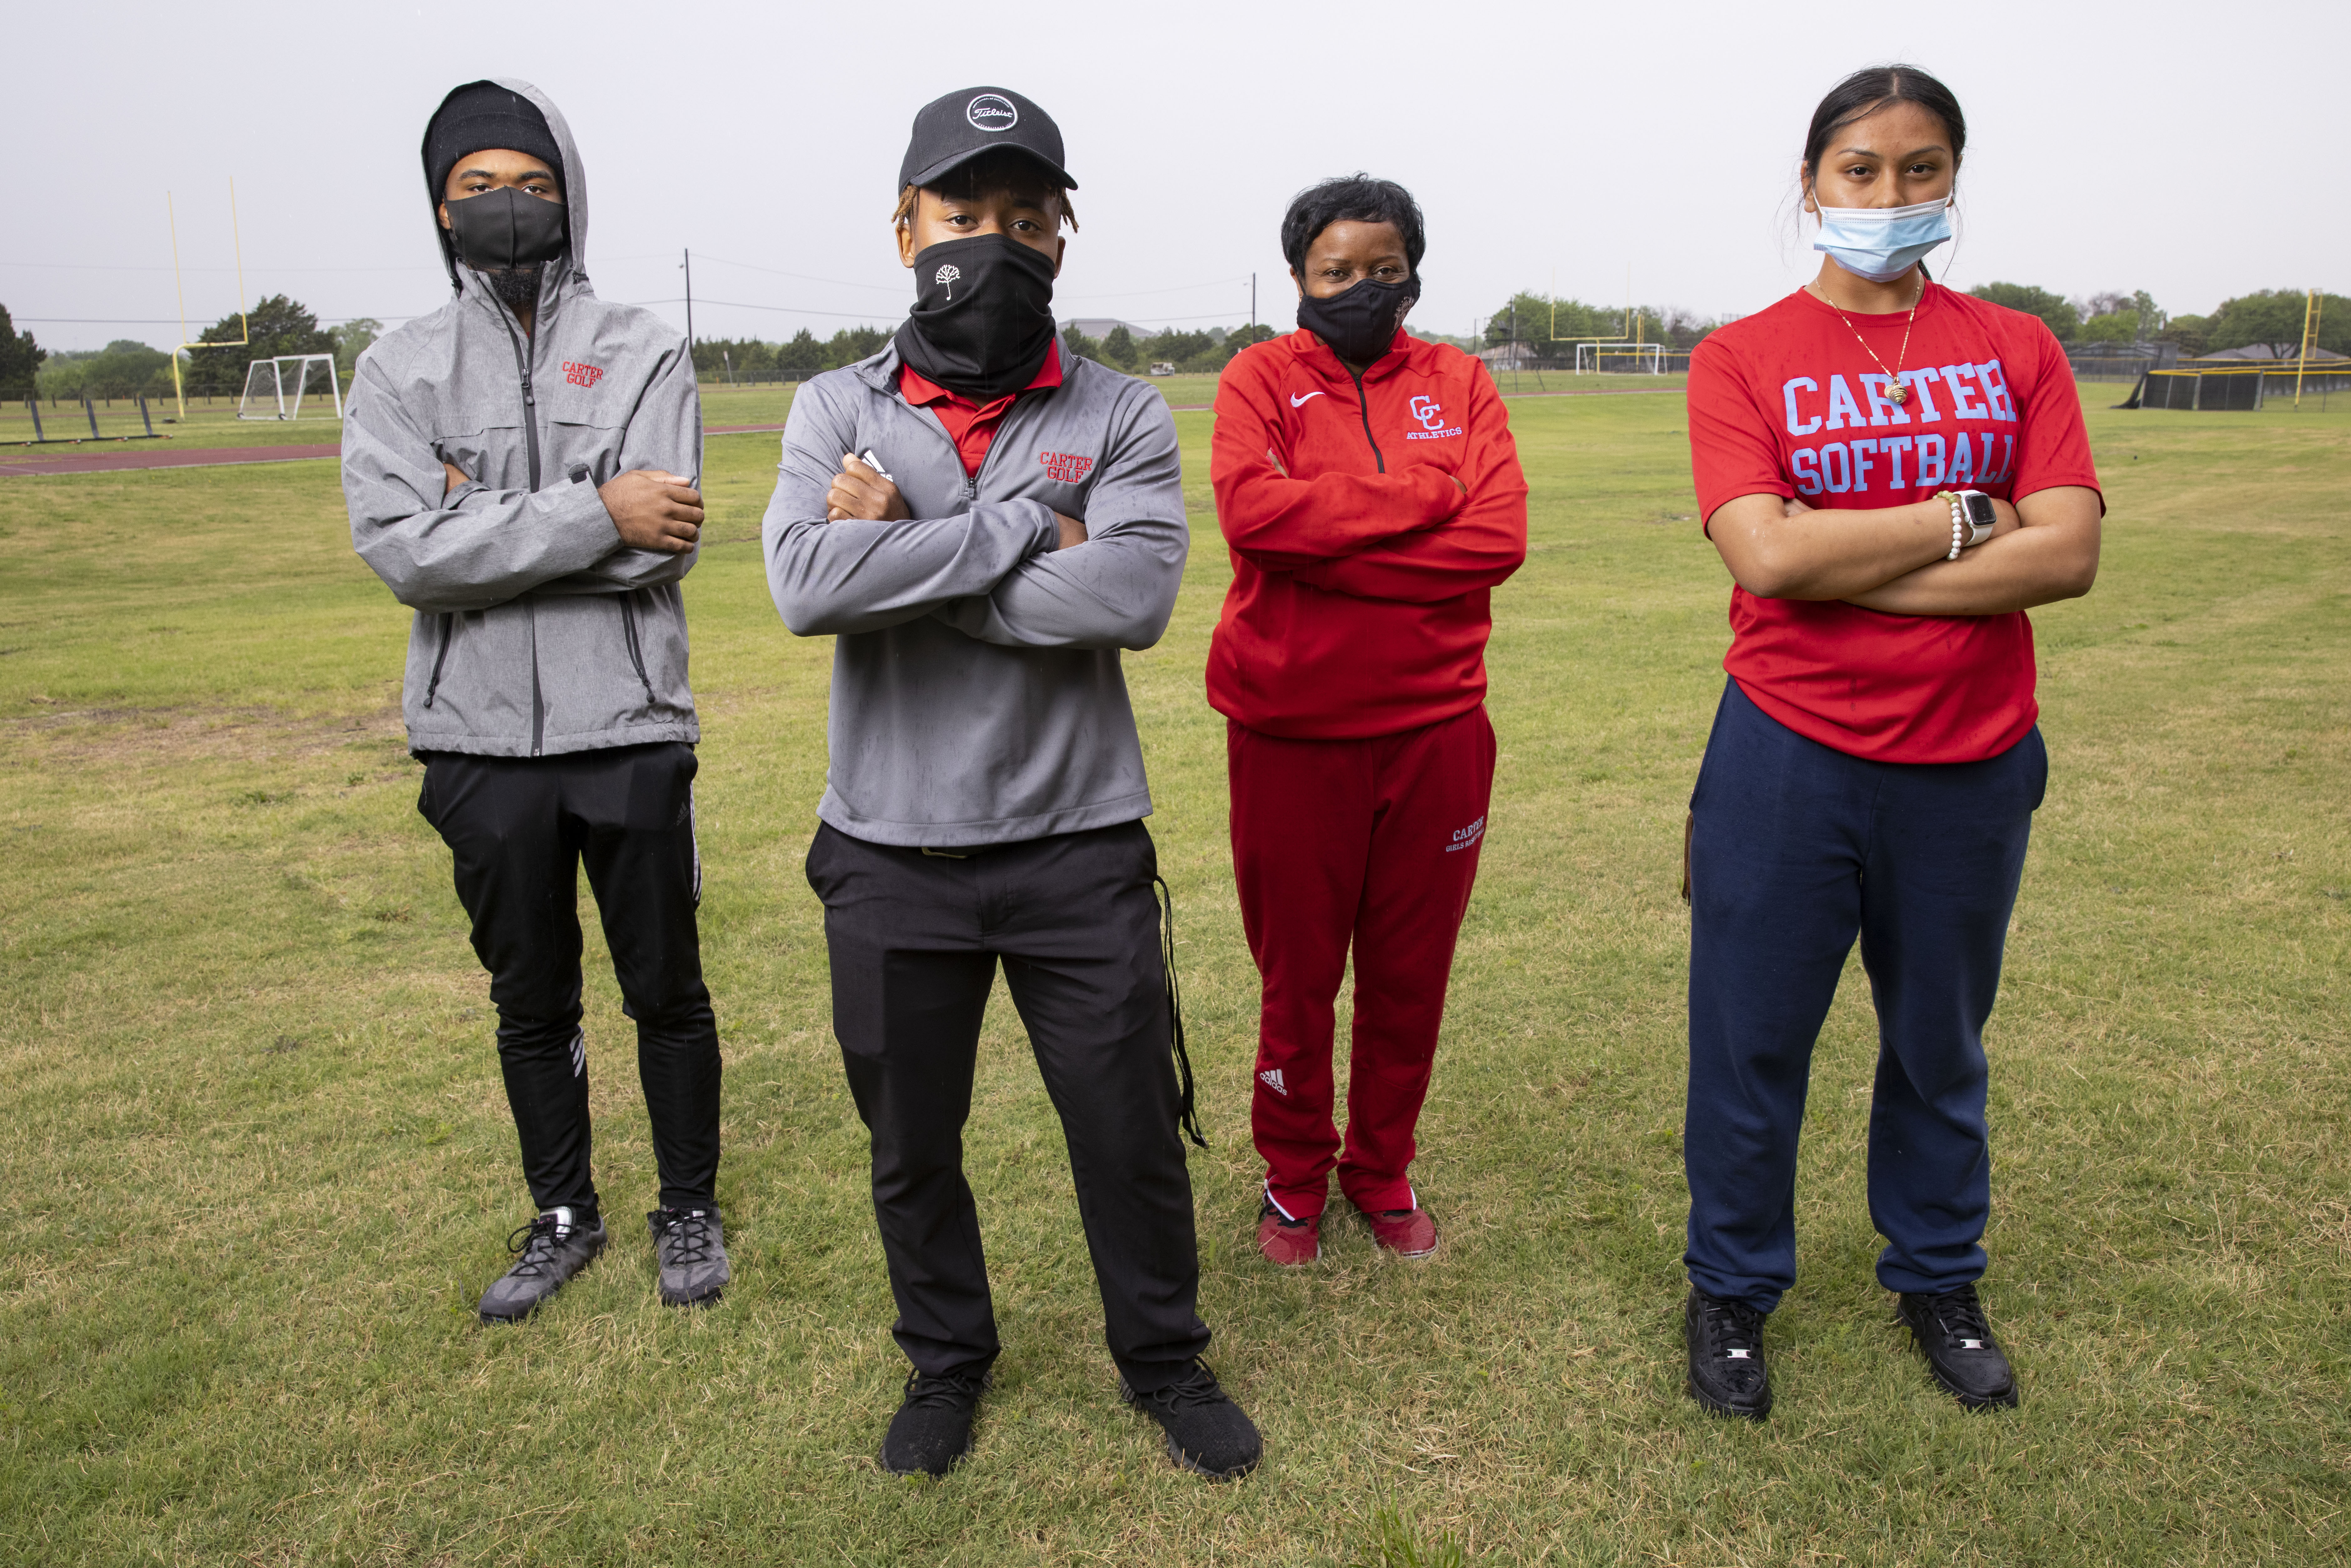 The rise of Carter golf — and how the school inspired change for minority  athletes